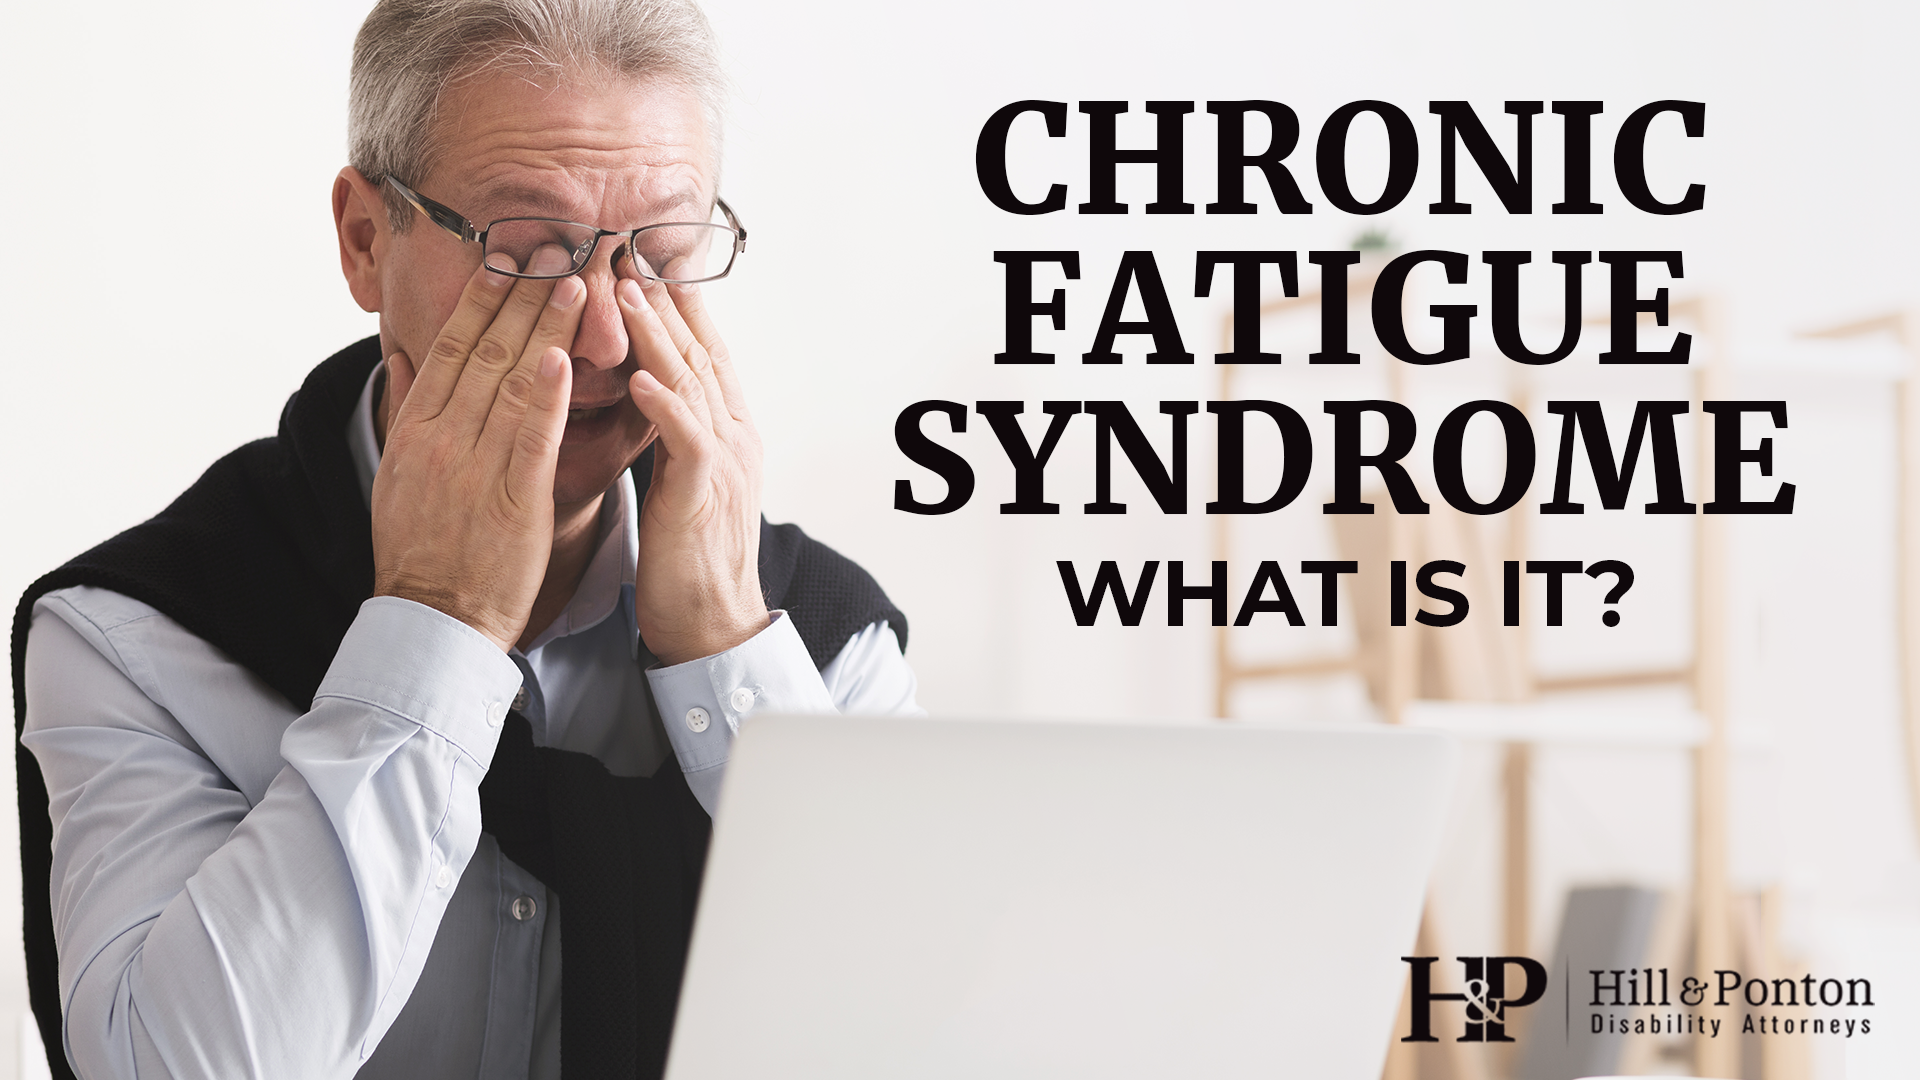 10 Symptoms of chronic fatigue syndrome You Should Never Ignore